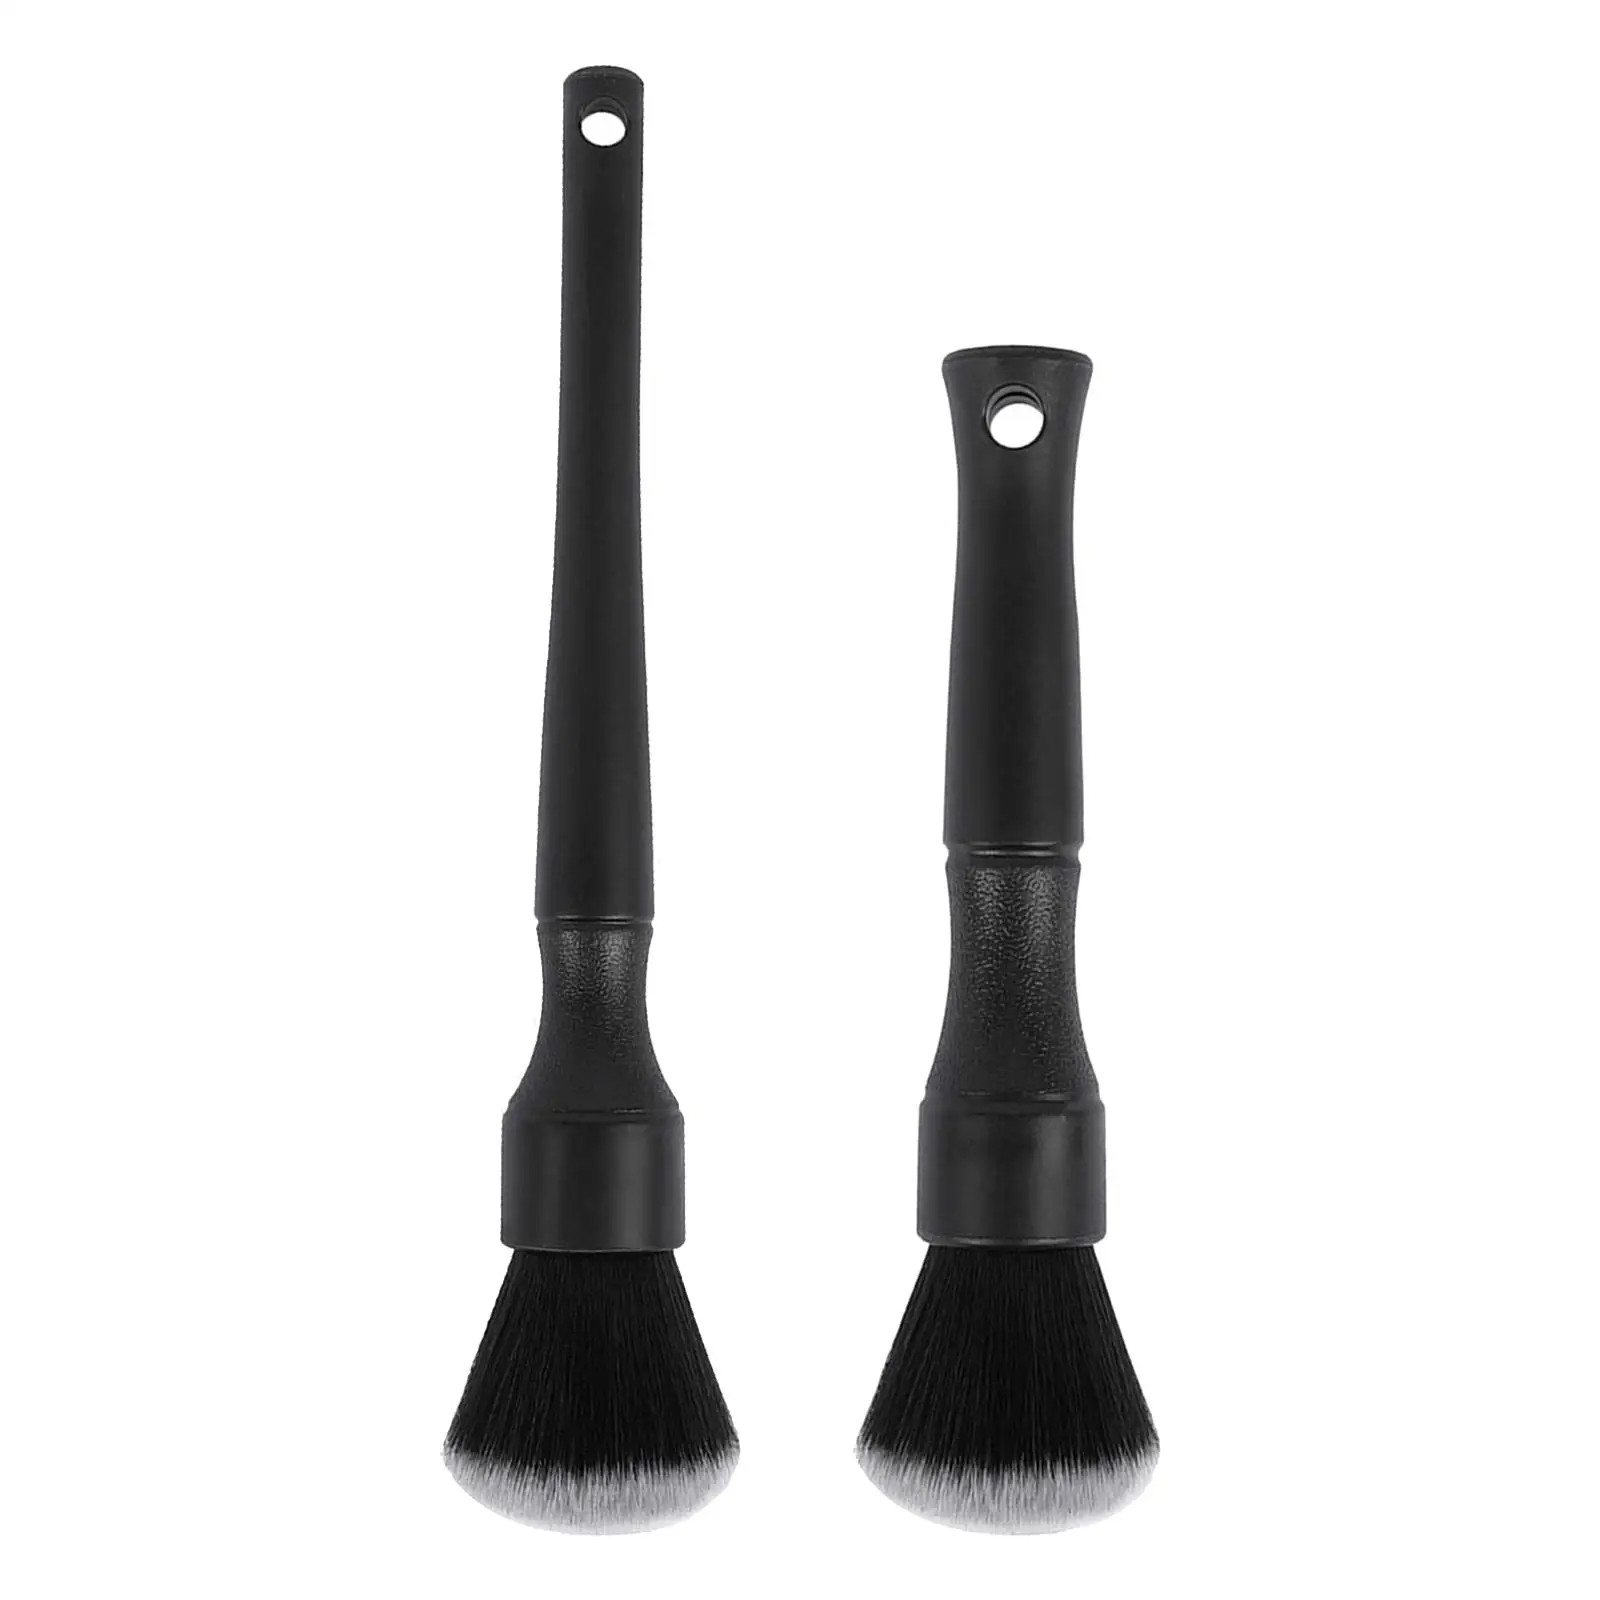 Soft Automotive Detail Brushes Fit for Cleaning Interior Exterior